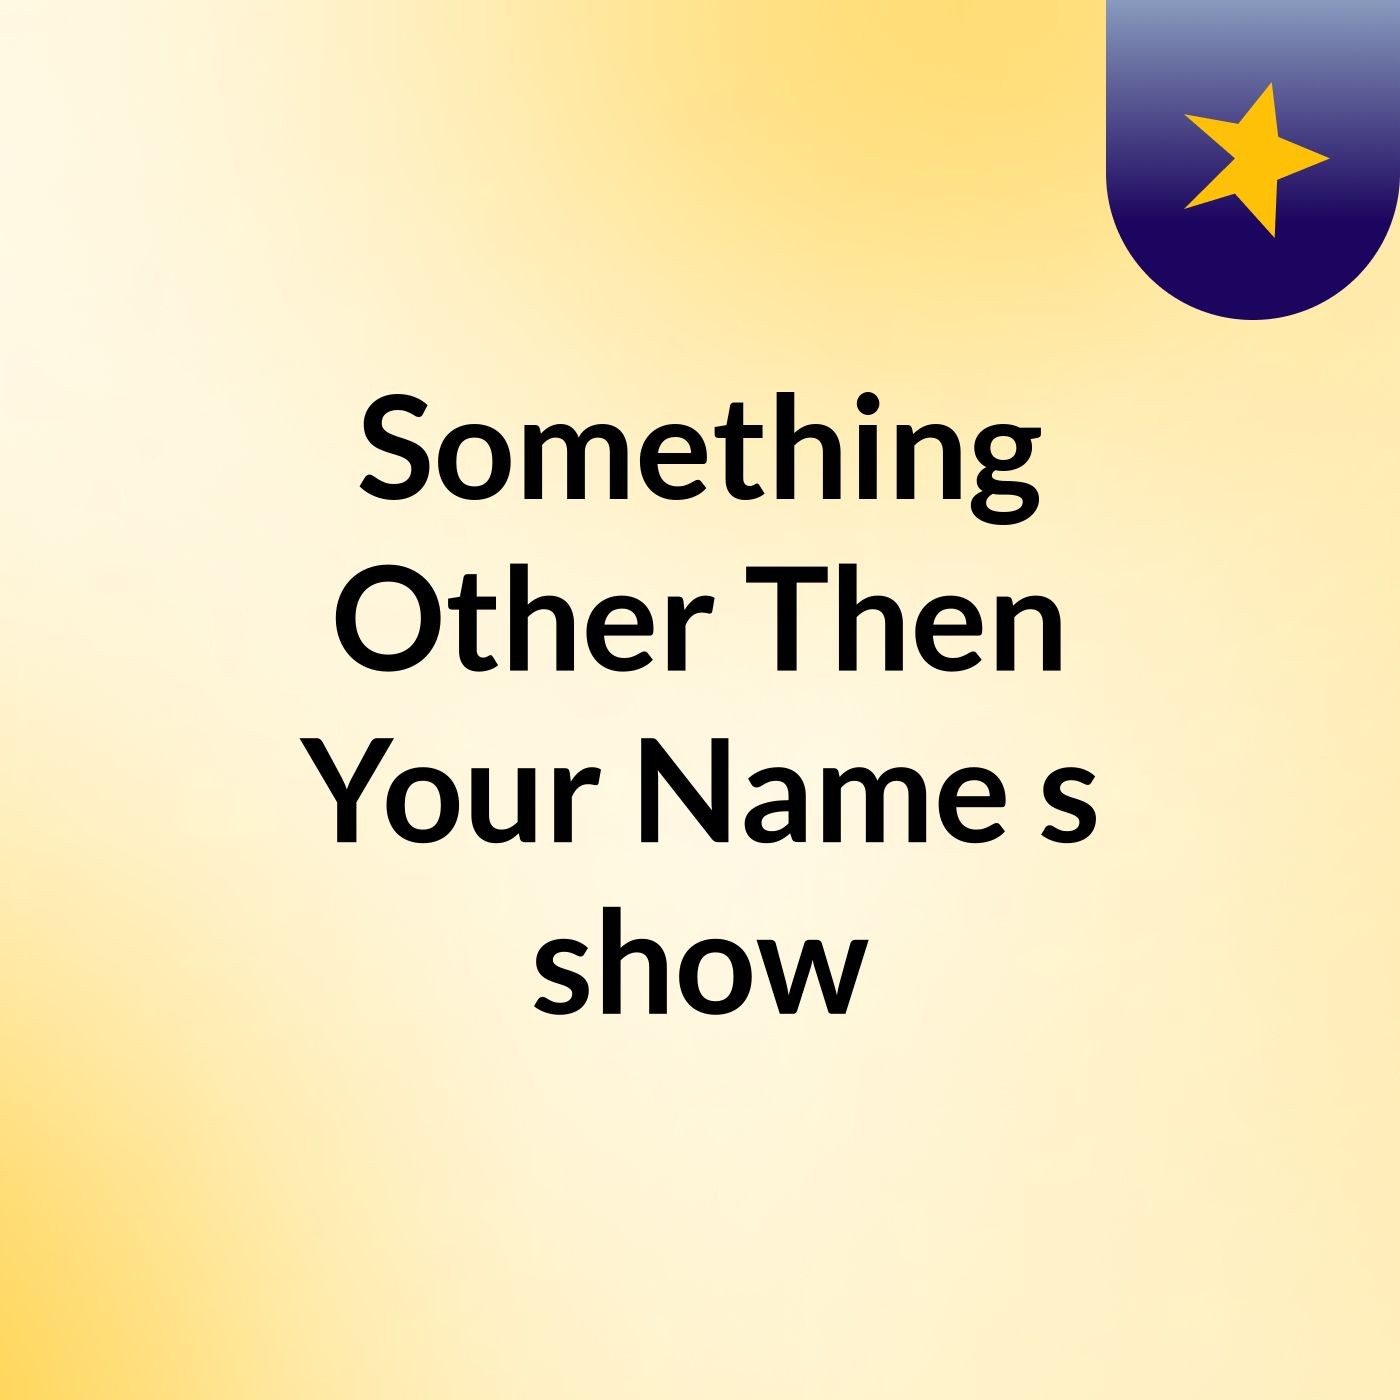 Something Other Then Your Name's show